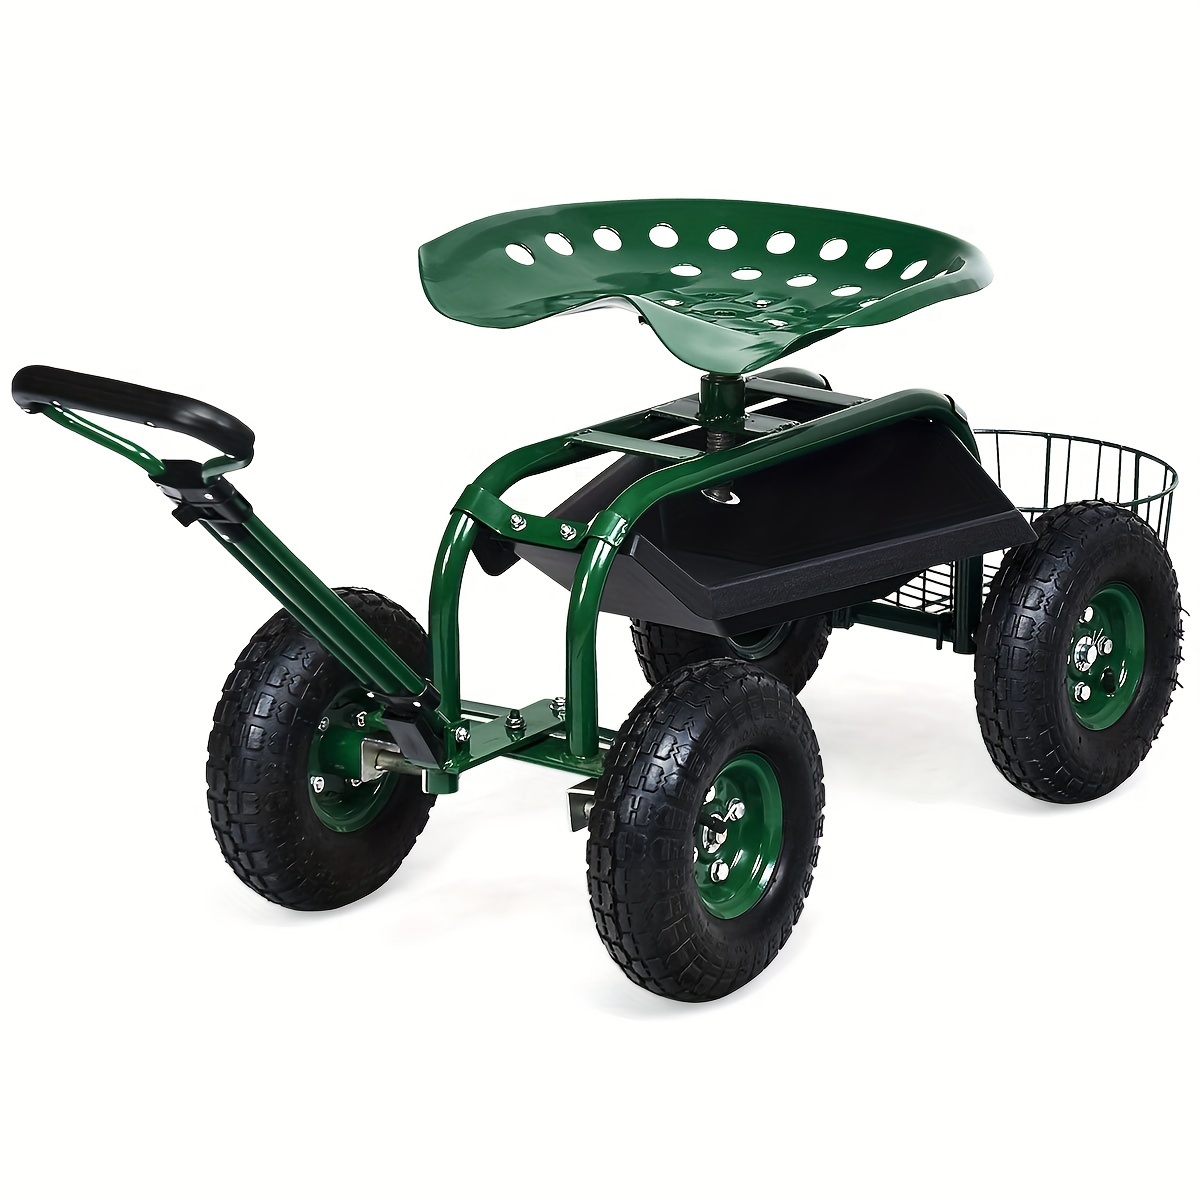 

1pc Garden Cart Patio Wagon Roll Work Seat, W/tray Basket Extendable Handle